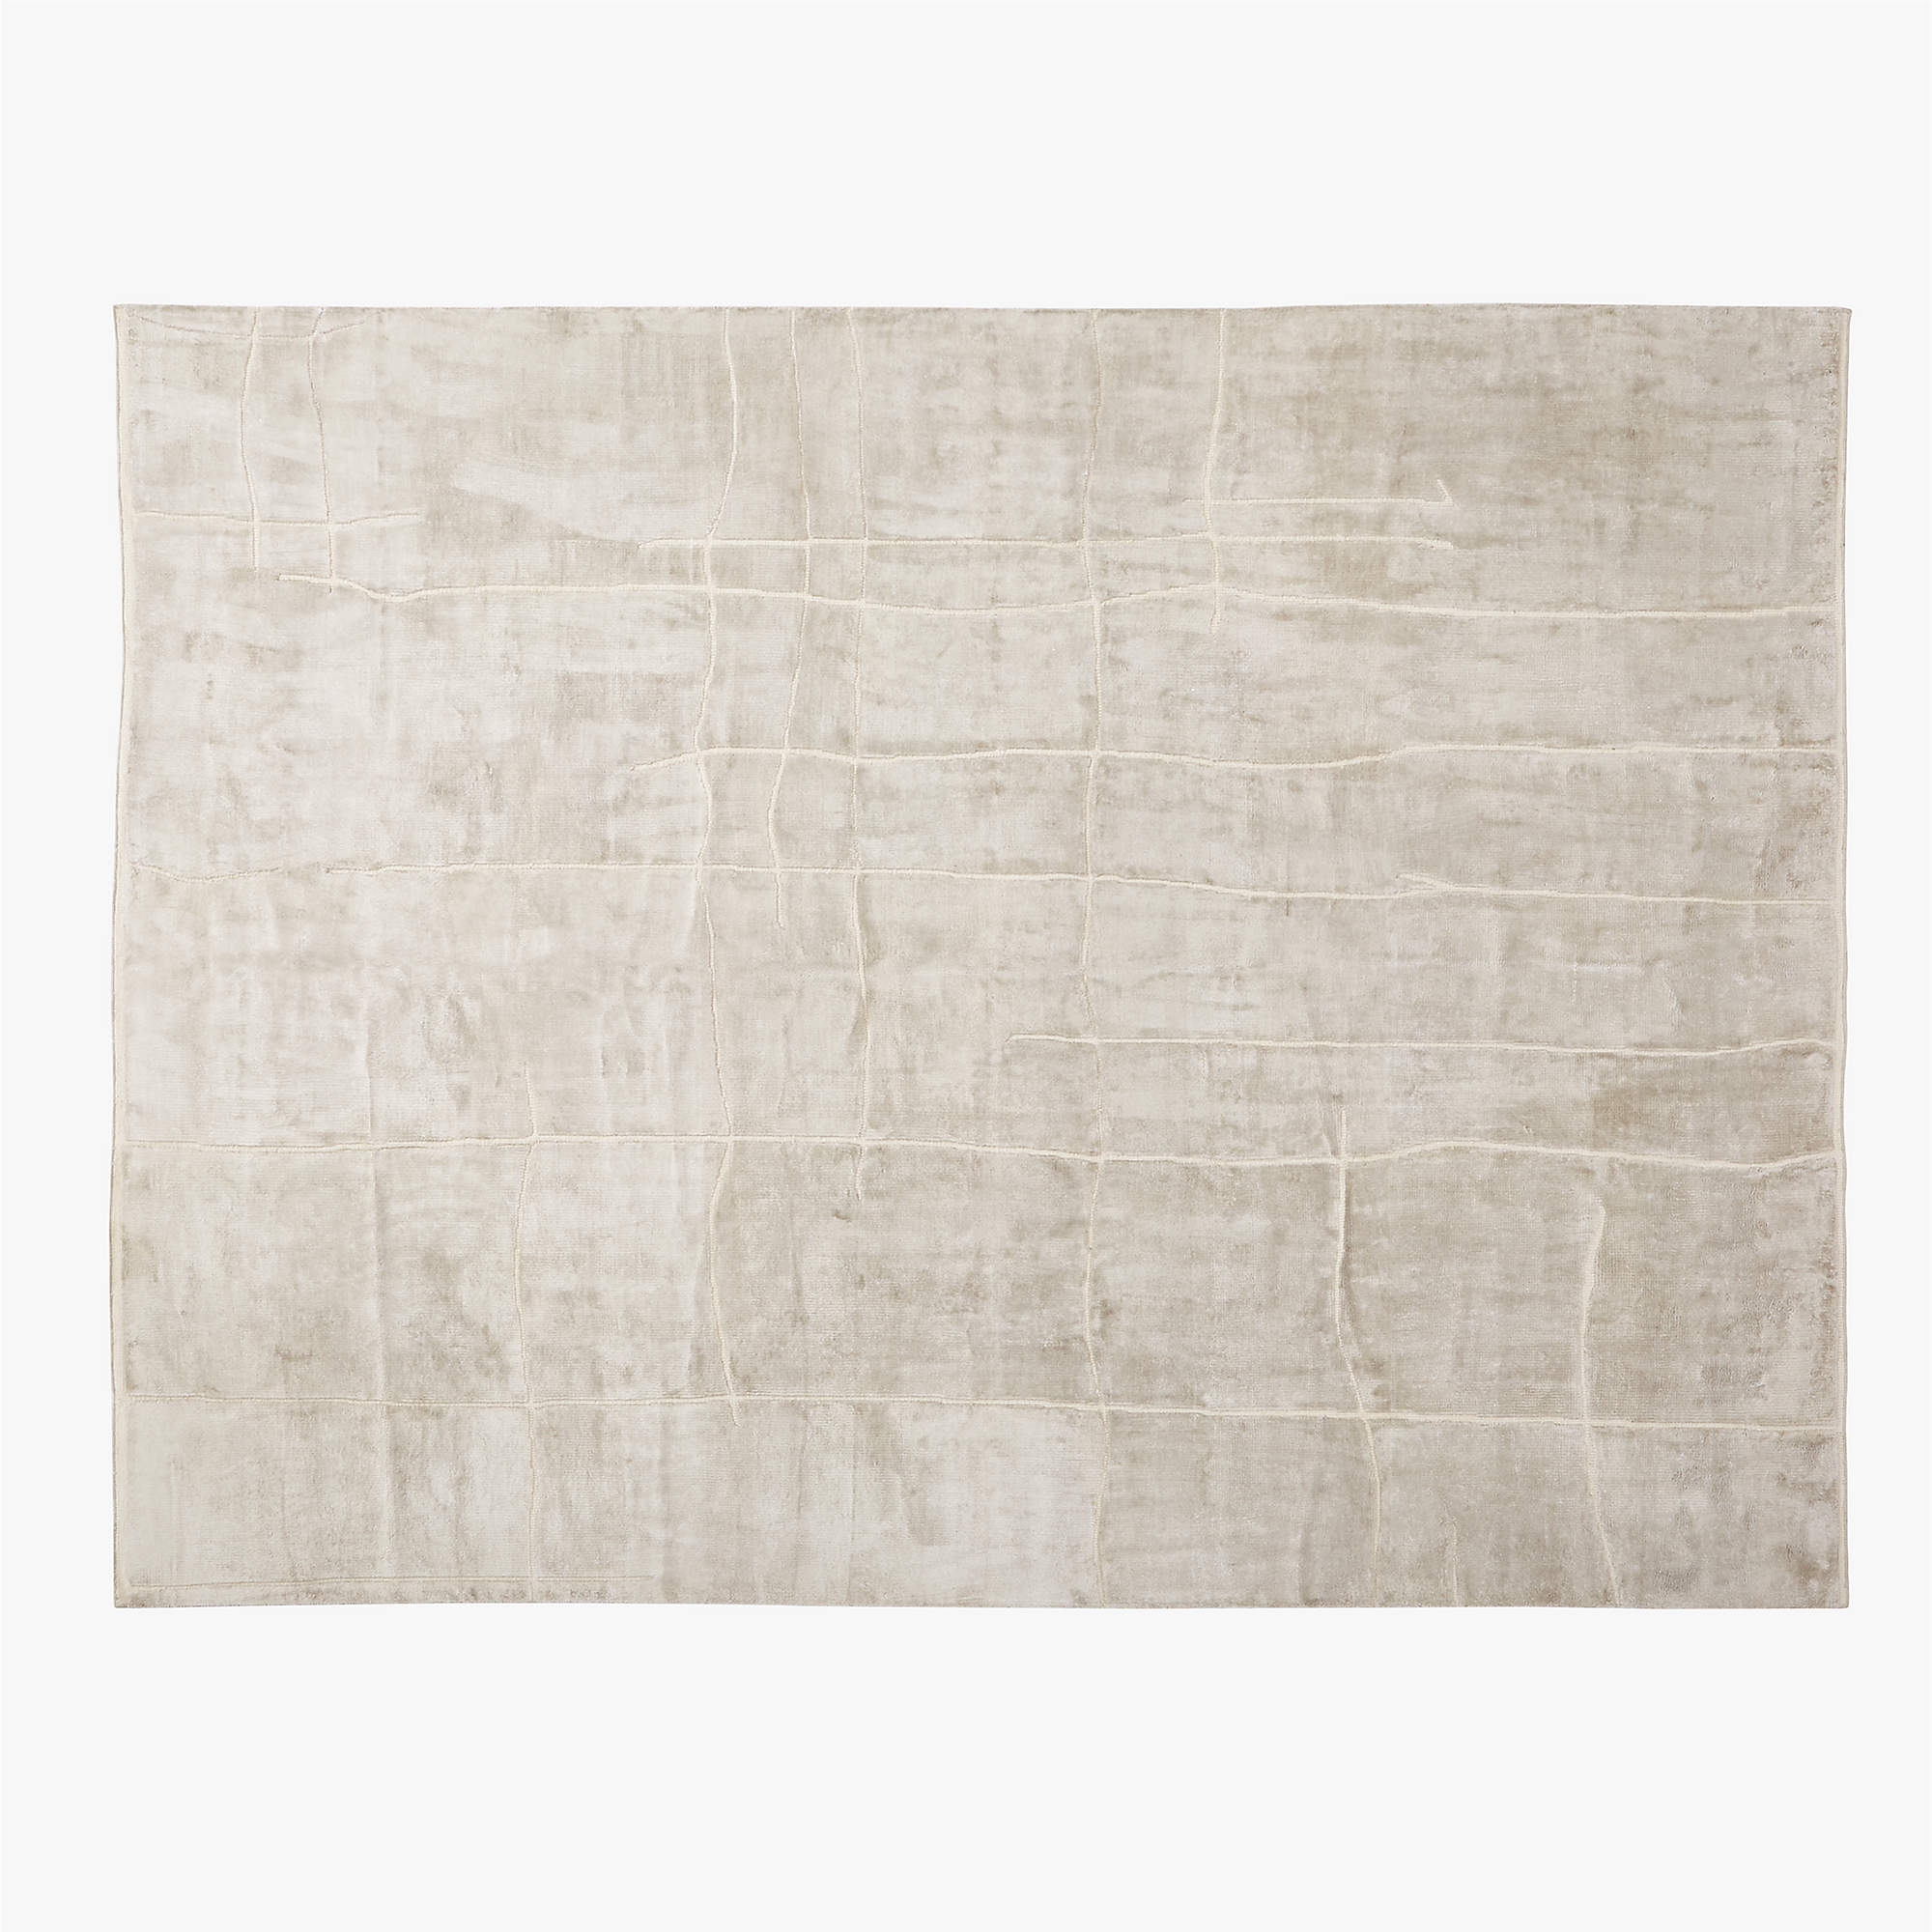 Hogan Hand-Knotted Silver Grey Viscose Area Rug 9'x12' - Image 0